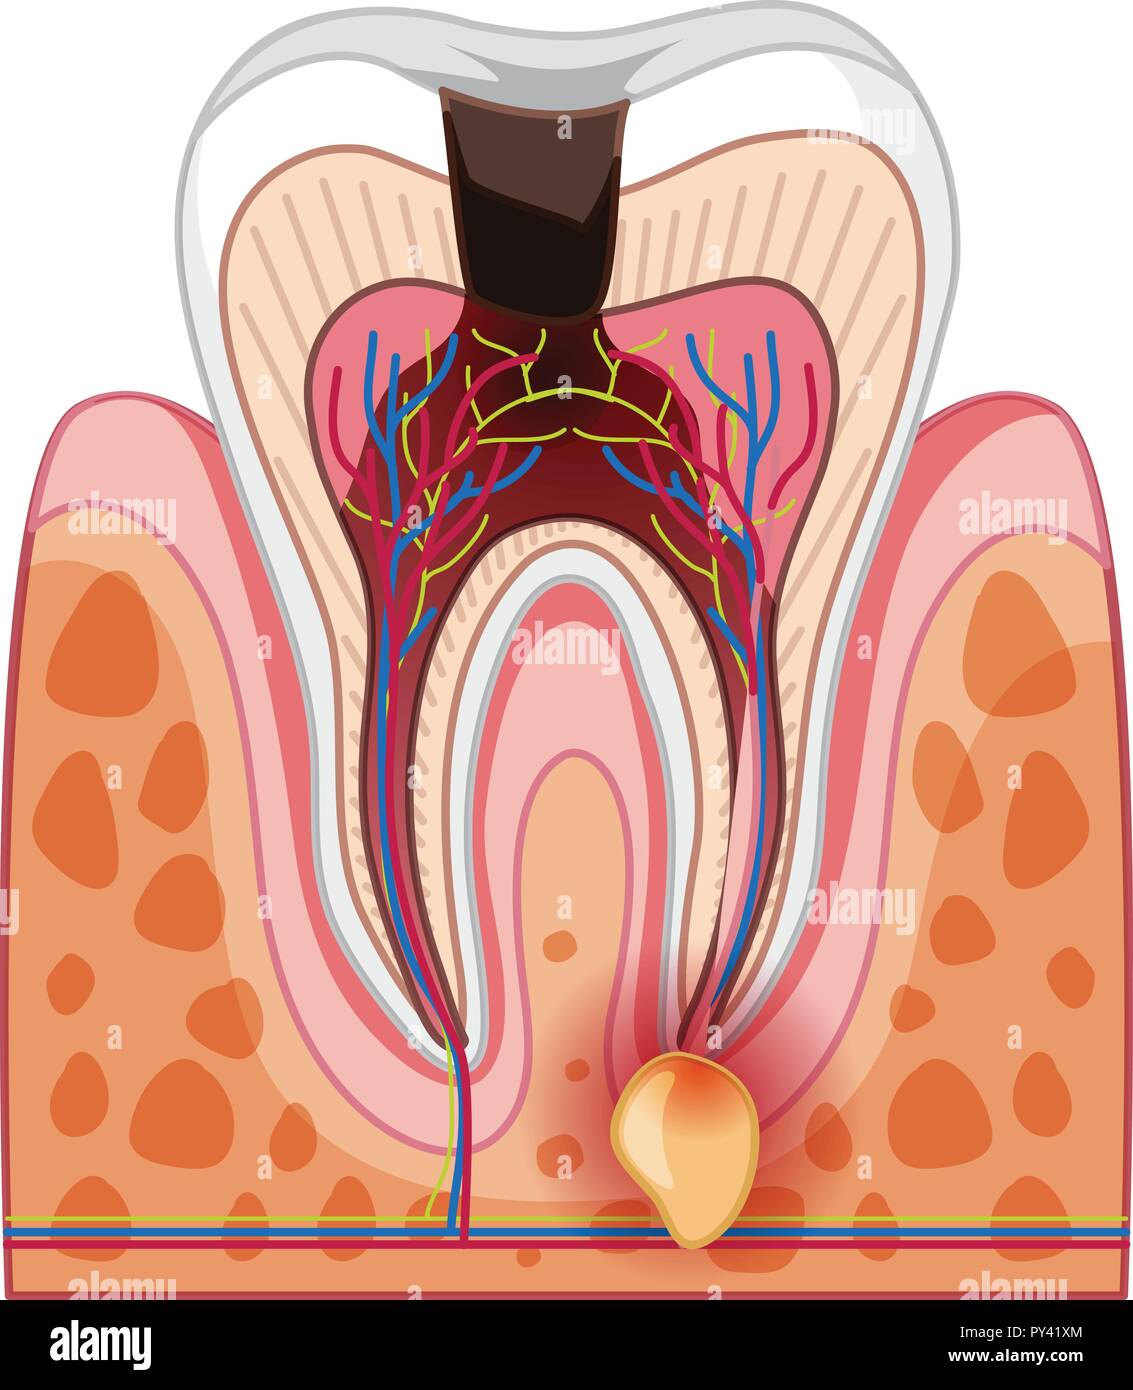 A Human Tooth Decay and Cavity illustration Stock Vector